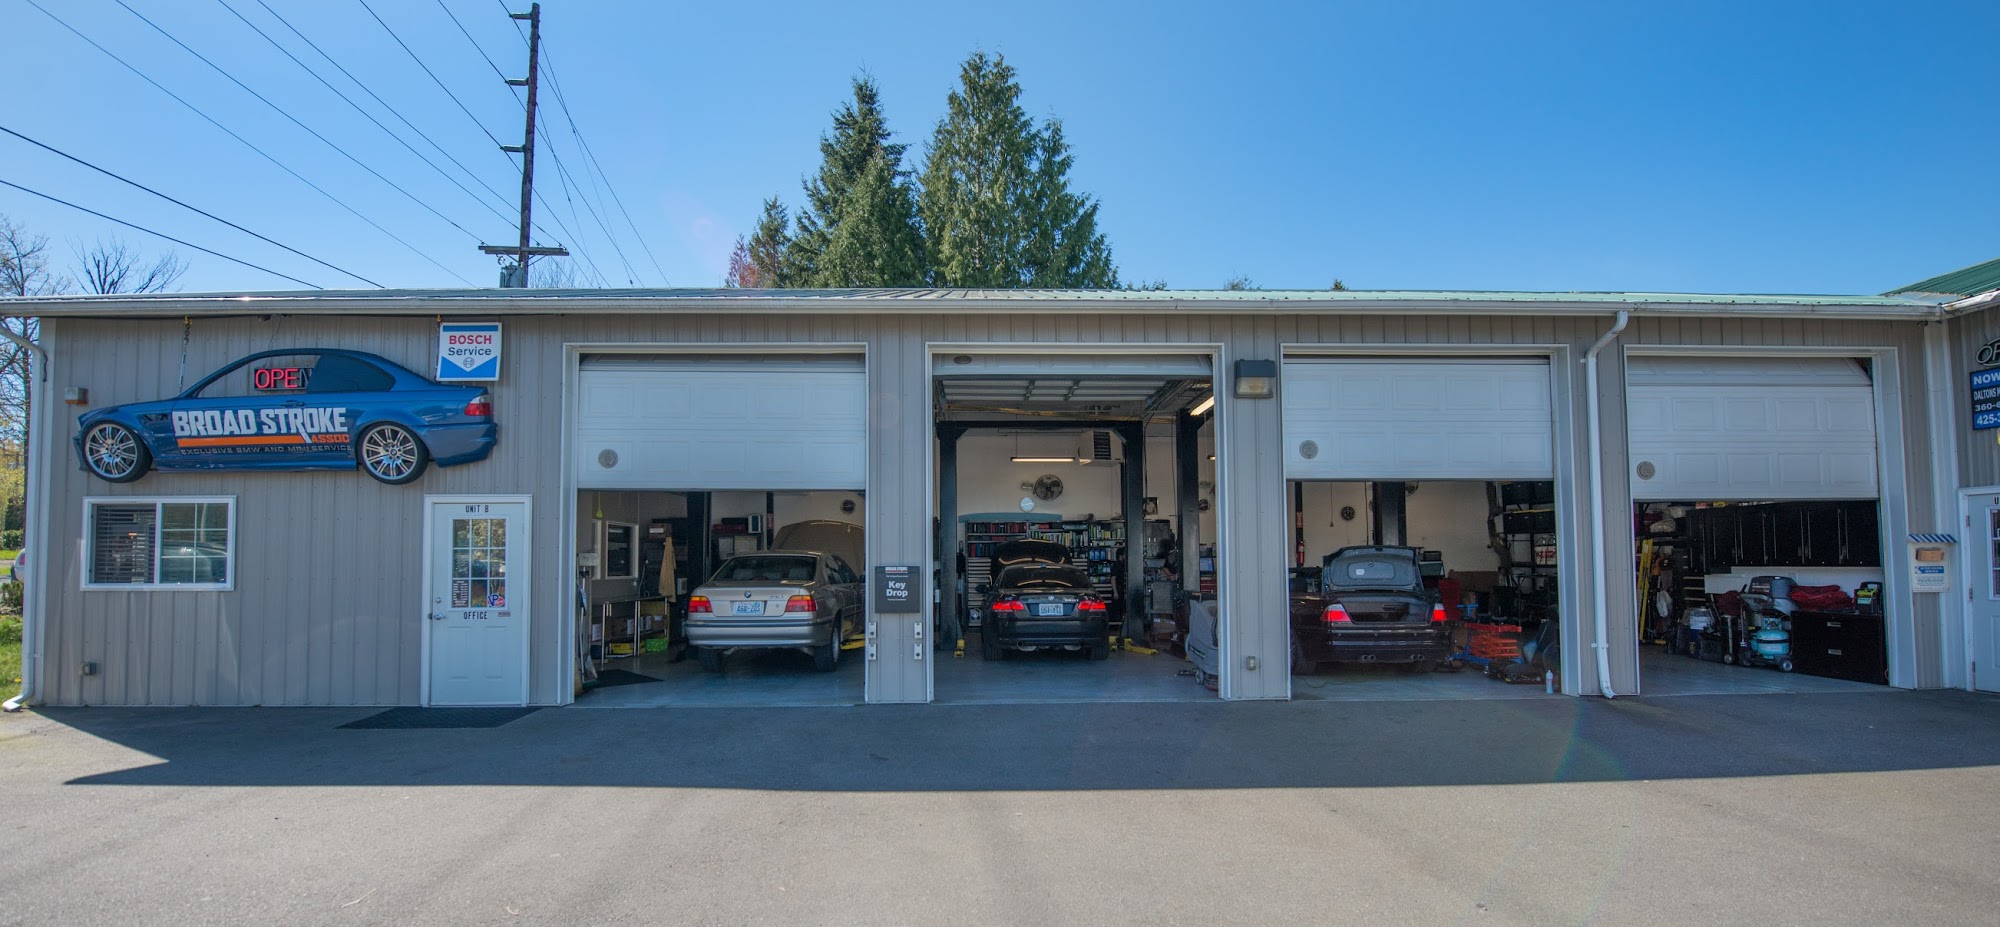 Broad Stroke BMW Service - Snohomish Auto Repair for BMW, Audi and Mini Cooper Vehicles